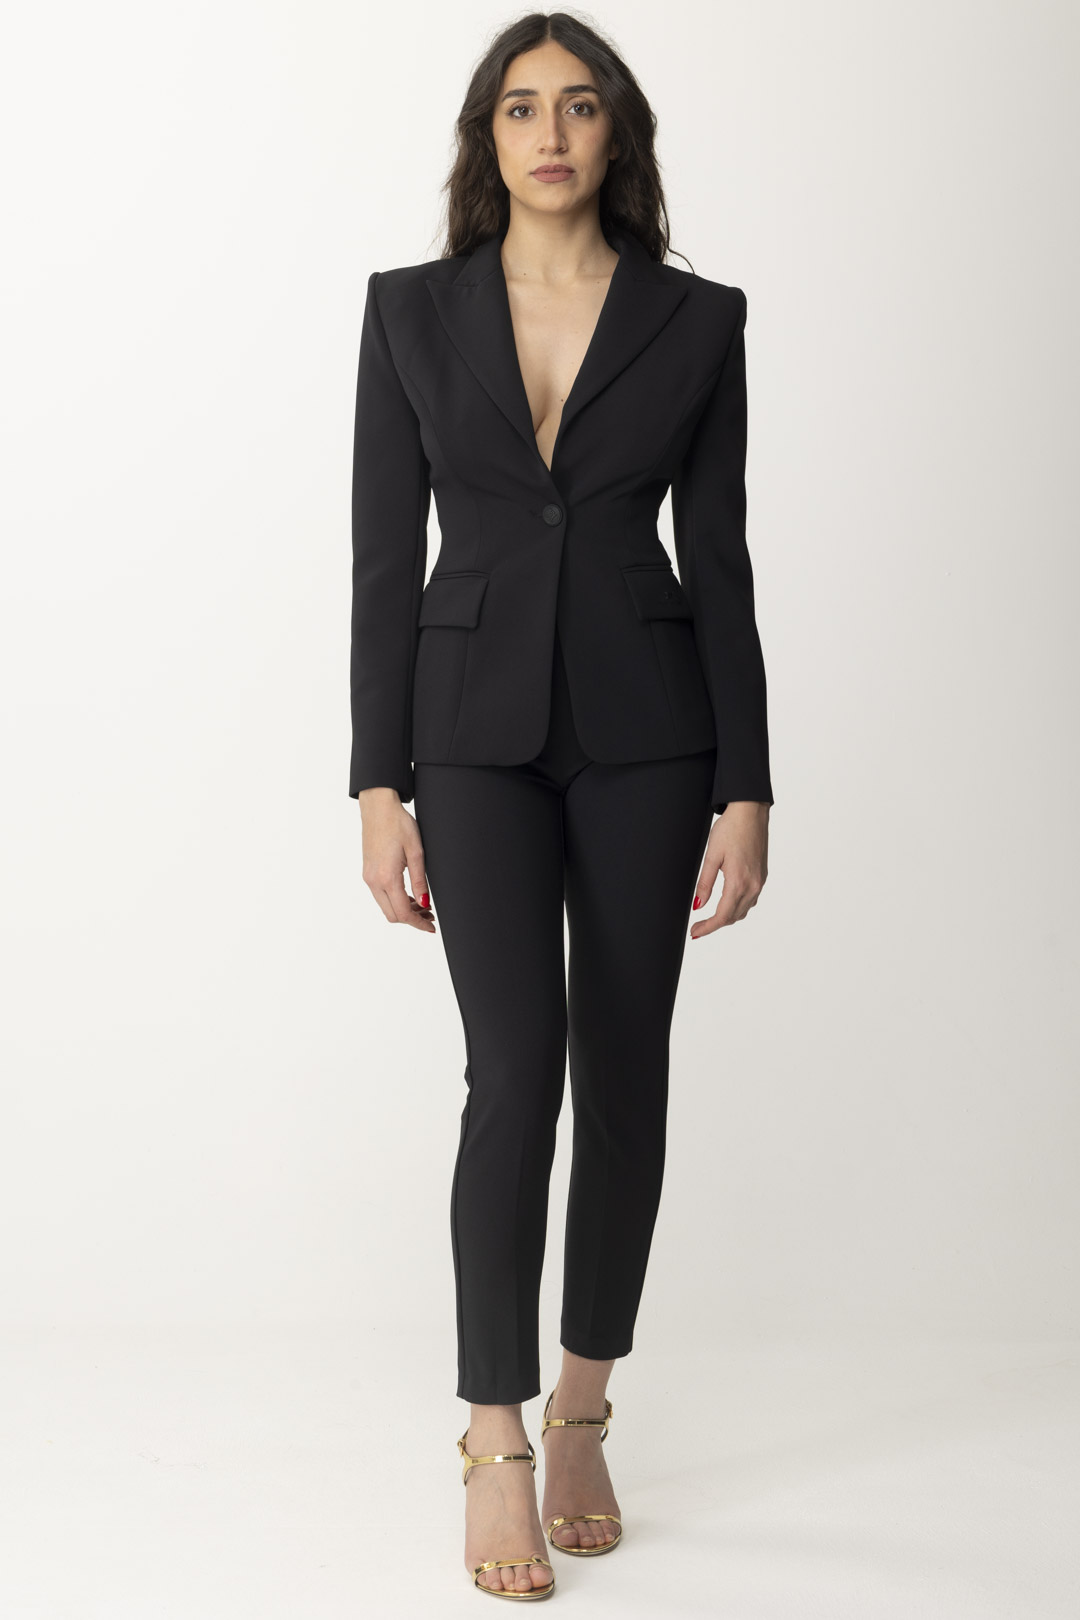 Preview: Elisabetta Franchi Jacket with Back Cut-Out Nero